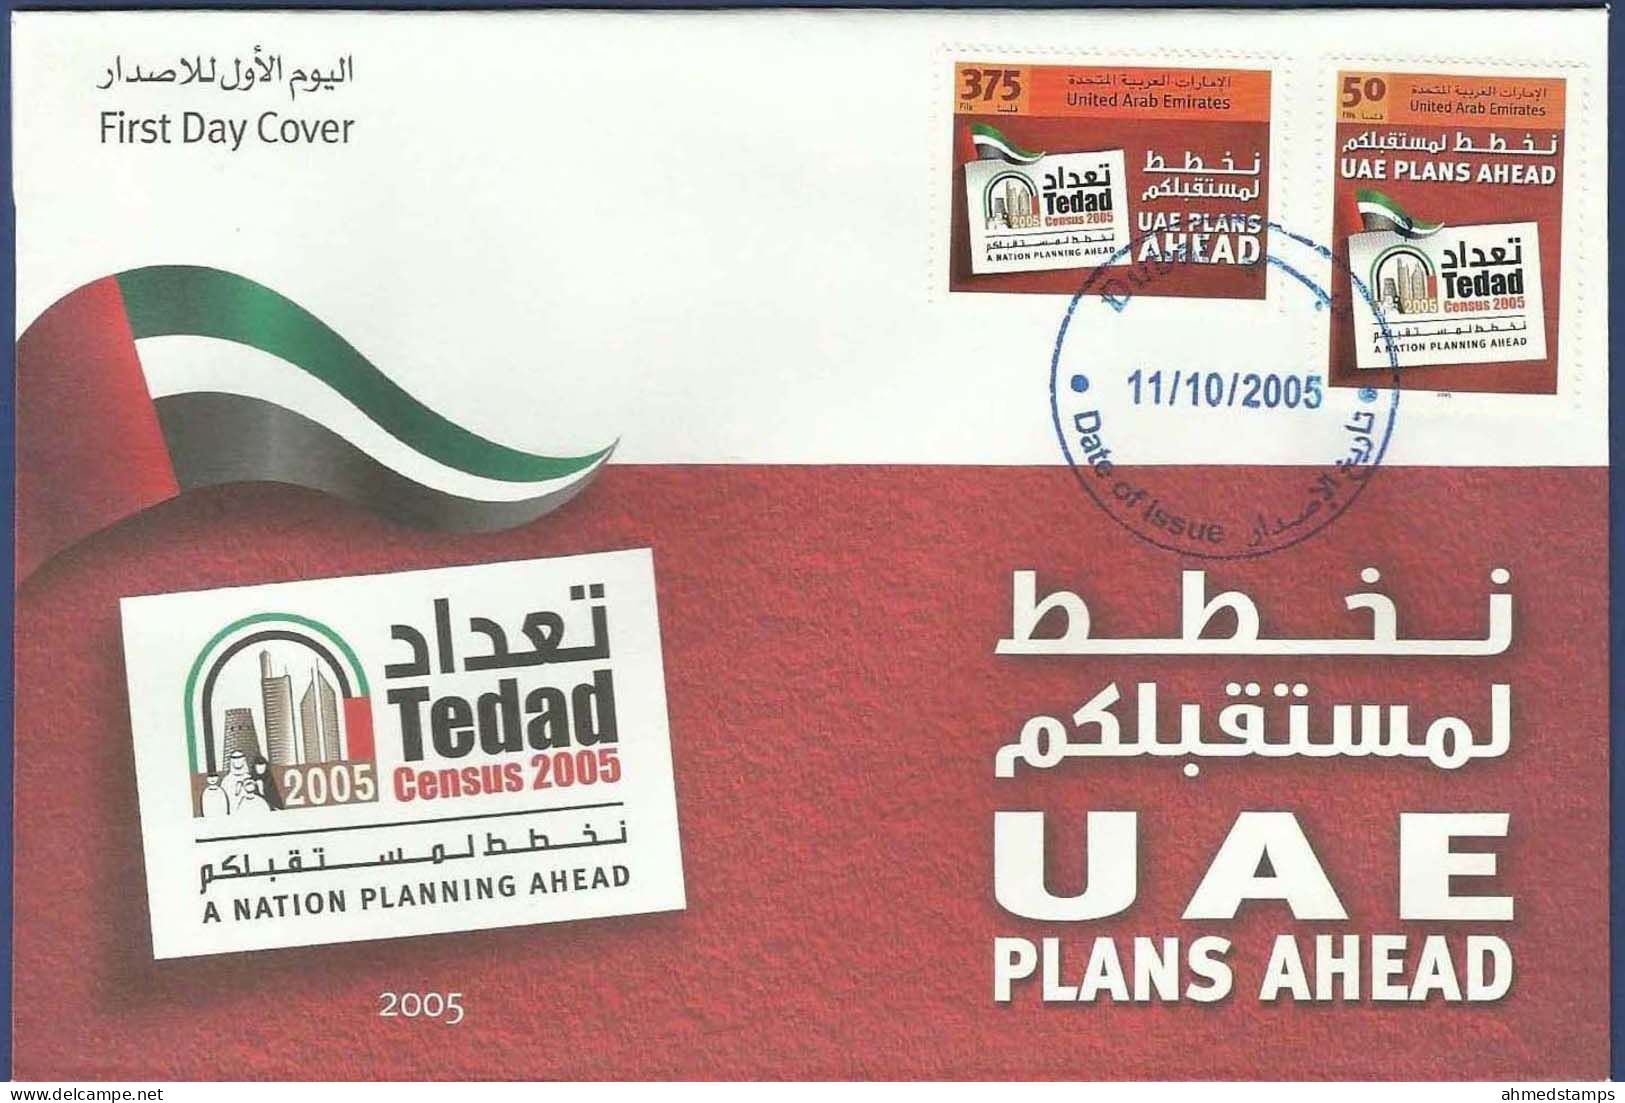 UNITED ARAB EMIRATES UAE MNH 2005 FDC FIRST DAY COVER CENSUS PLANS AHEAD A NATION PLANNING - Emiratos Árabes Unidos